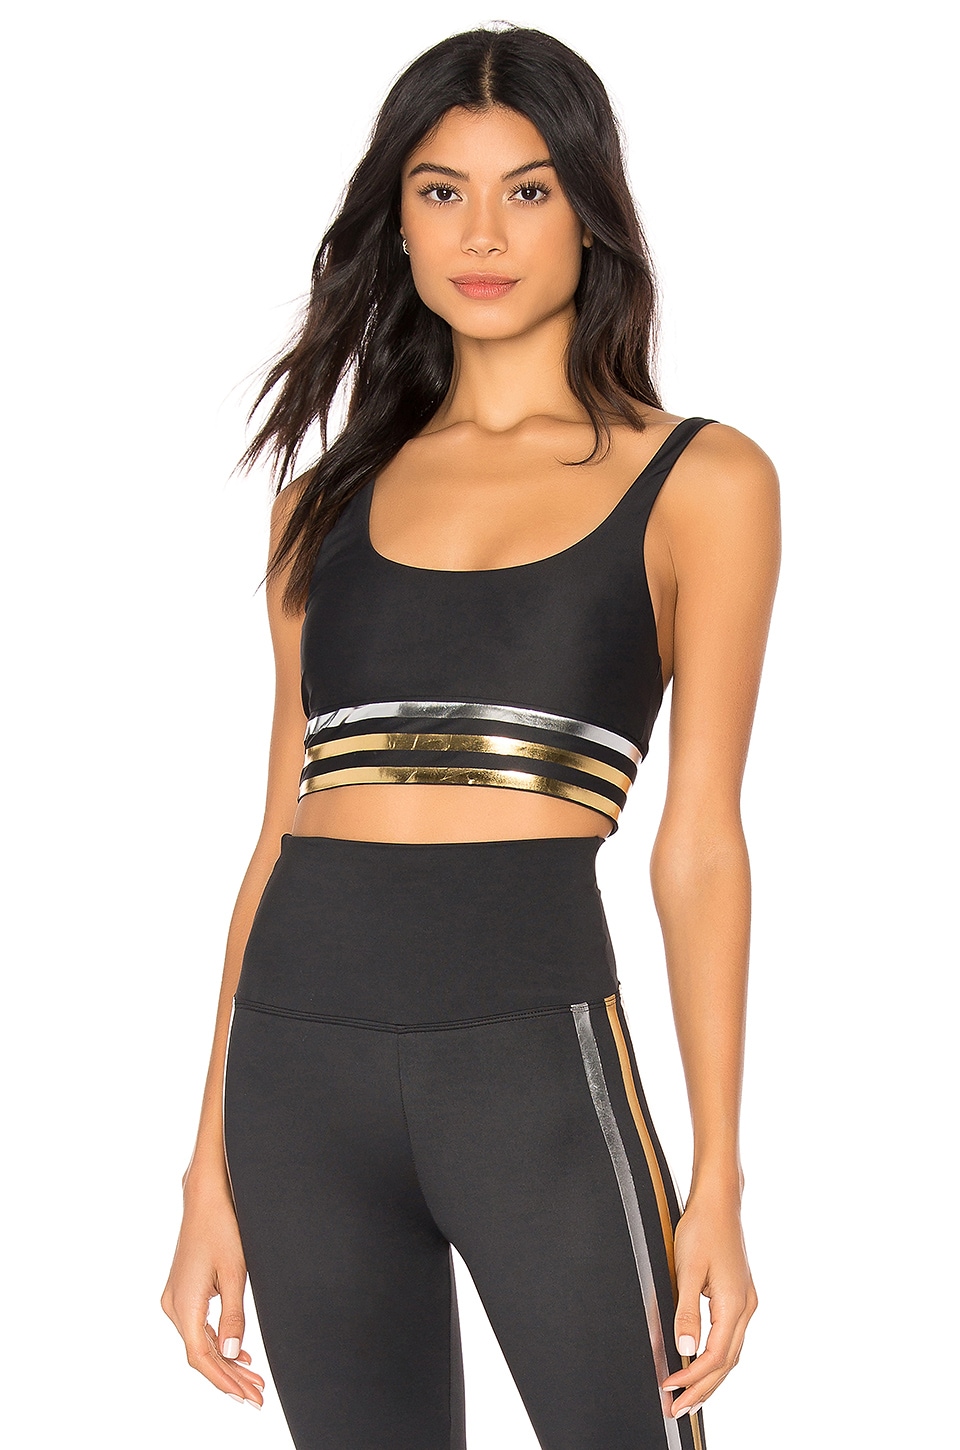 Share Leah Sports Bra in Gold on Twitter (opens in a new window). избранное...